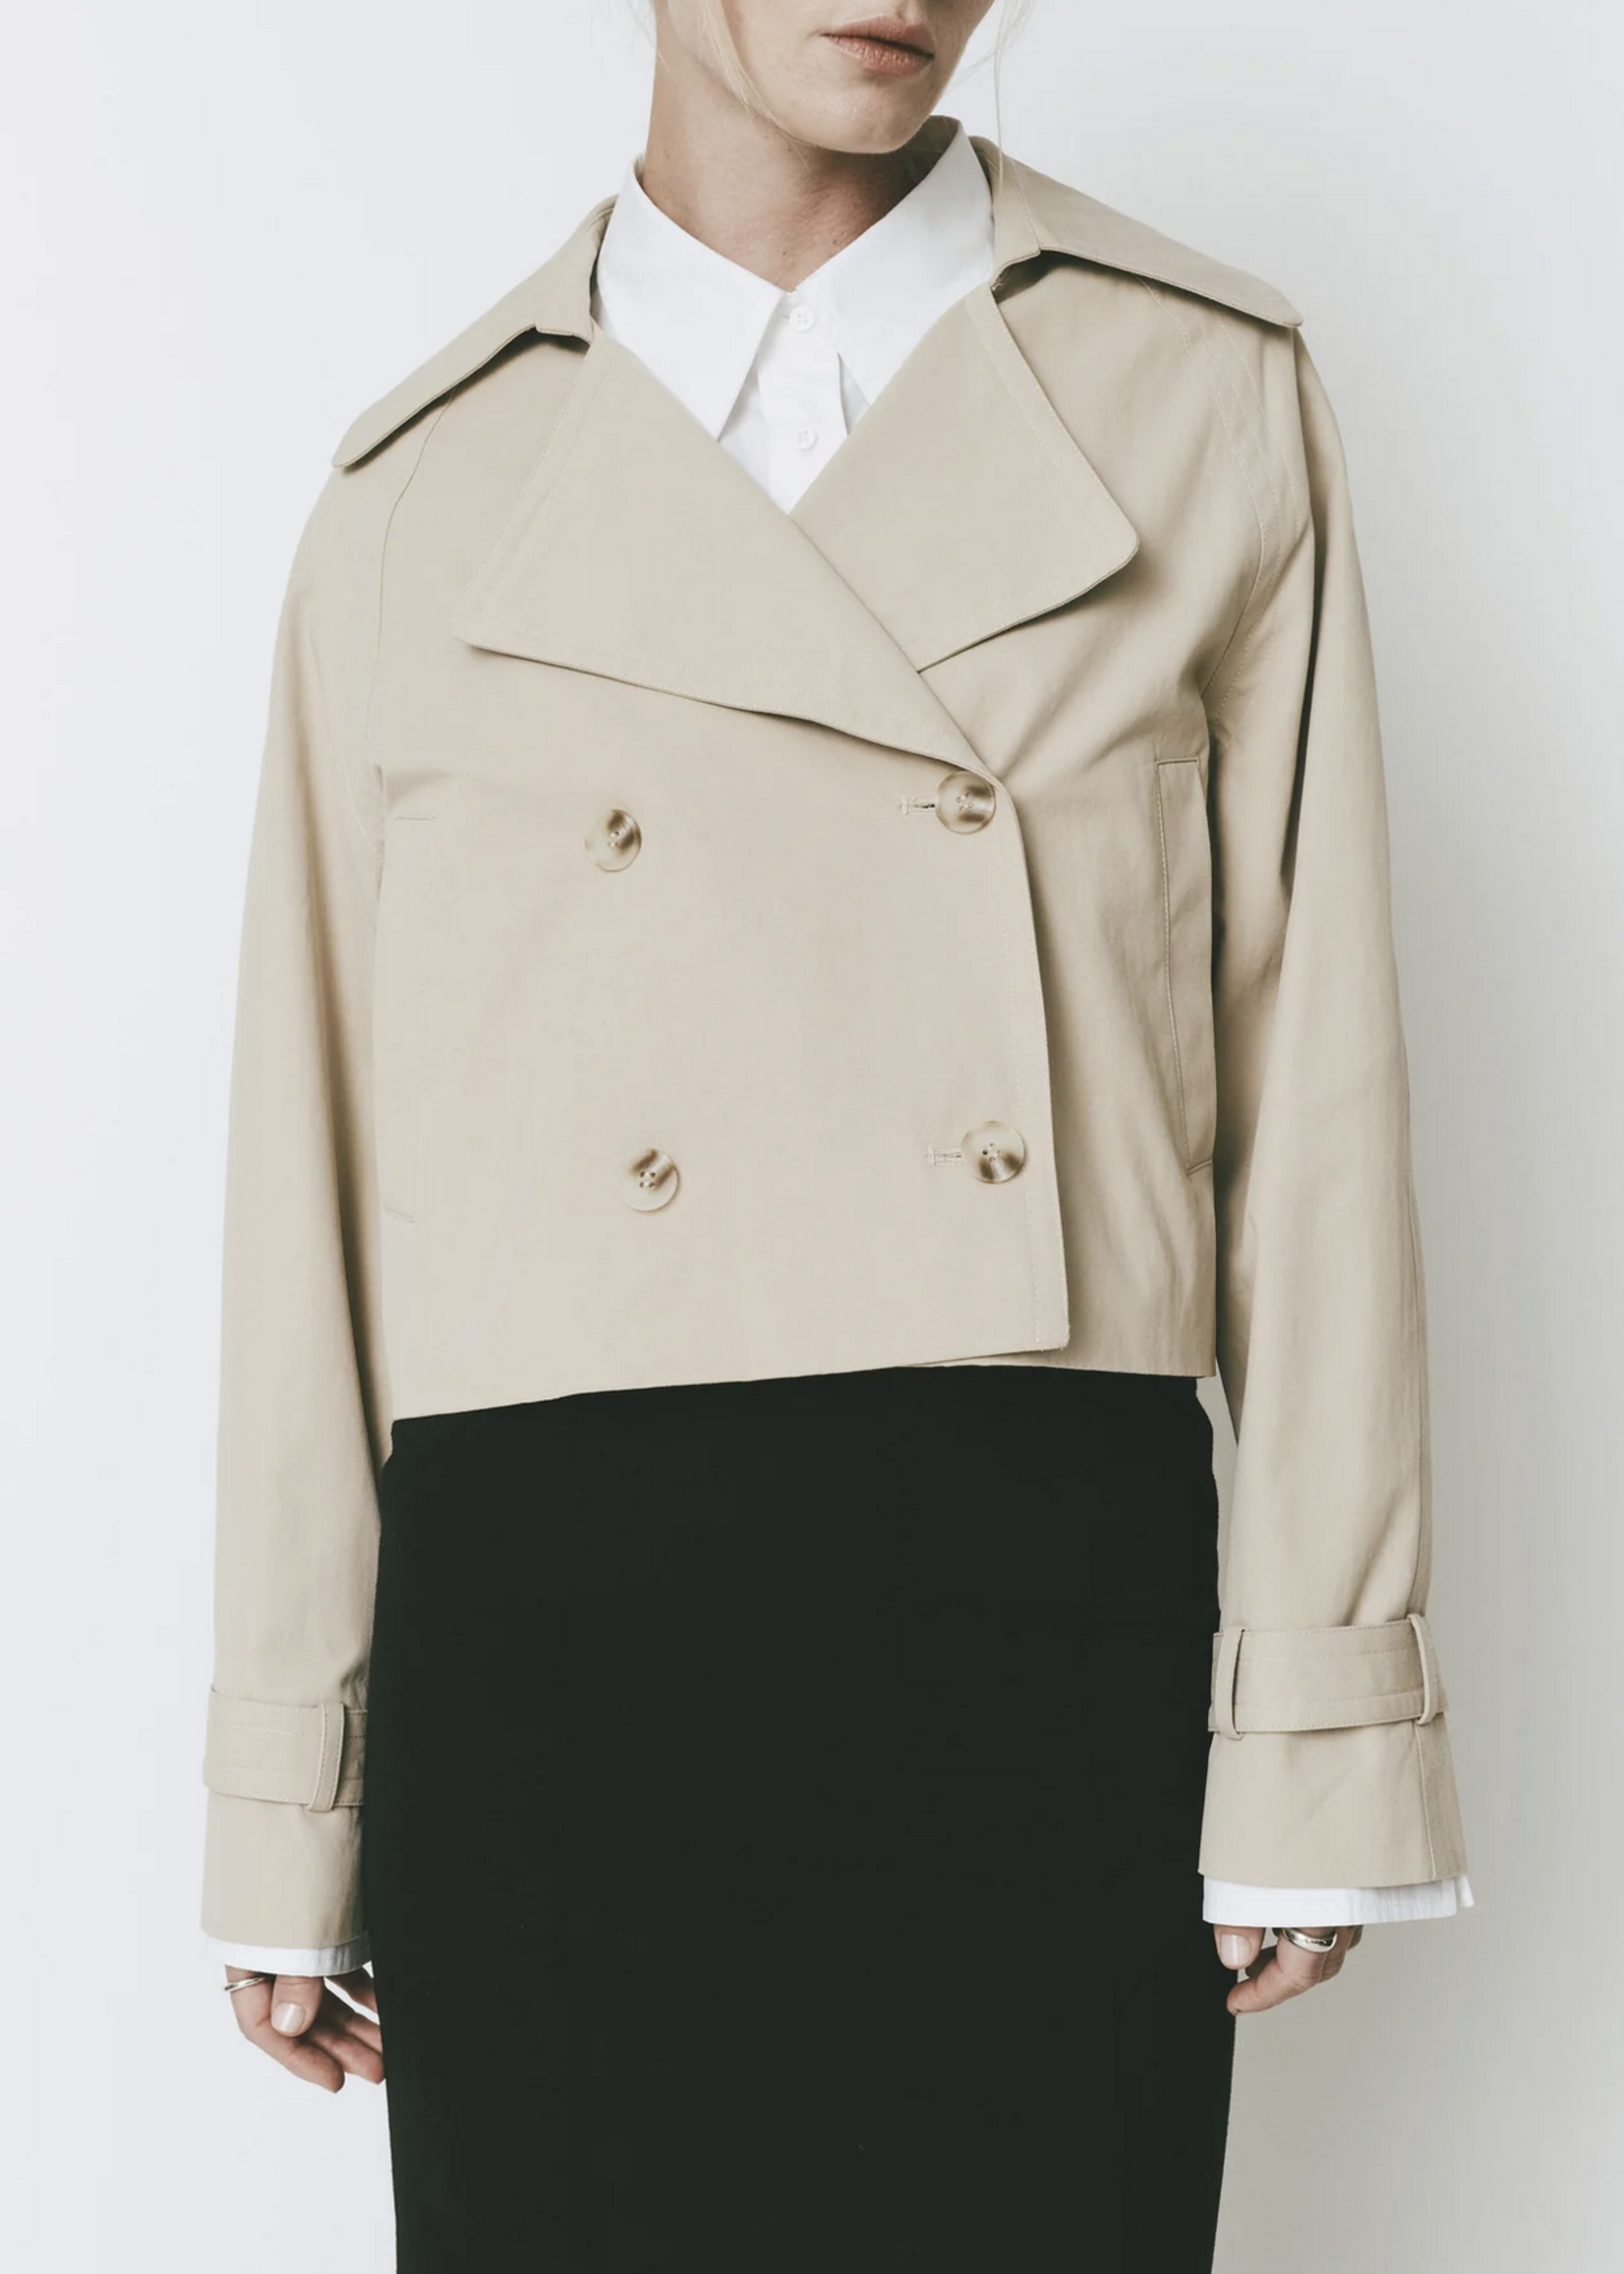 Rue Sophie Honore Cropped Trench Coat